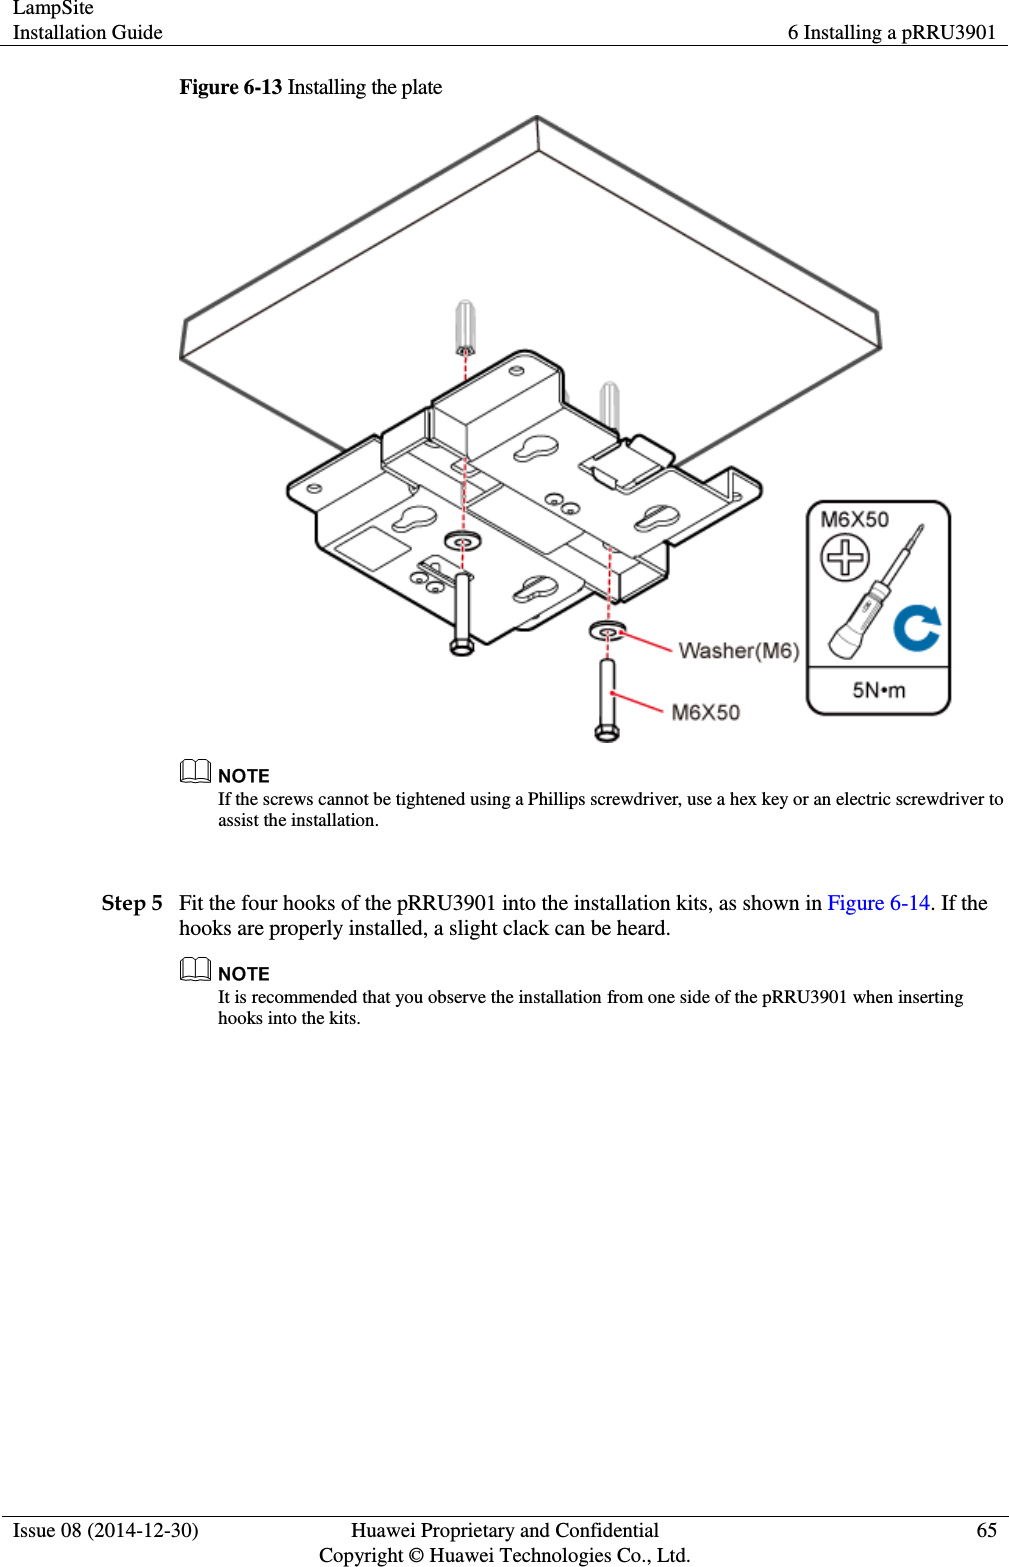 LampSite Installation Guide 6 Installing a pRRU3901  Issue 08 (2014-12-30) Huawei Proprietary and Confidential                                     Copyright © Huawei Technologies Co., Ltd. 65  Figure 6-13 Installing the plate   If the screws cannot be tightened using a Phillips screwdriver, use a hex key or an electric screwdriver to assist the installation.  Step 5 Fit the four hooks of the pRRU3901 into the installation kits, as shown in Figure 6-14. If the hooks are properly installed, a slight clack can be heard.  It is recommended that you observe the installation from one side of the pRRU3901 when inserting hooks into the kits. 